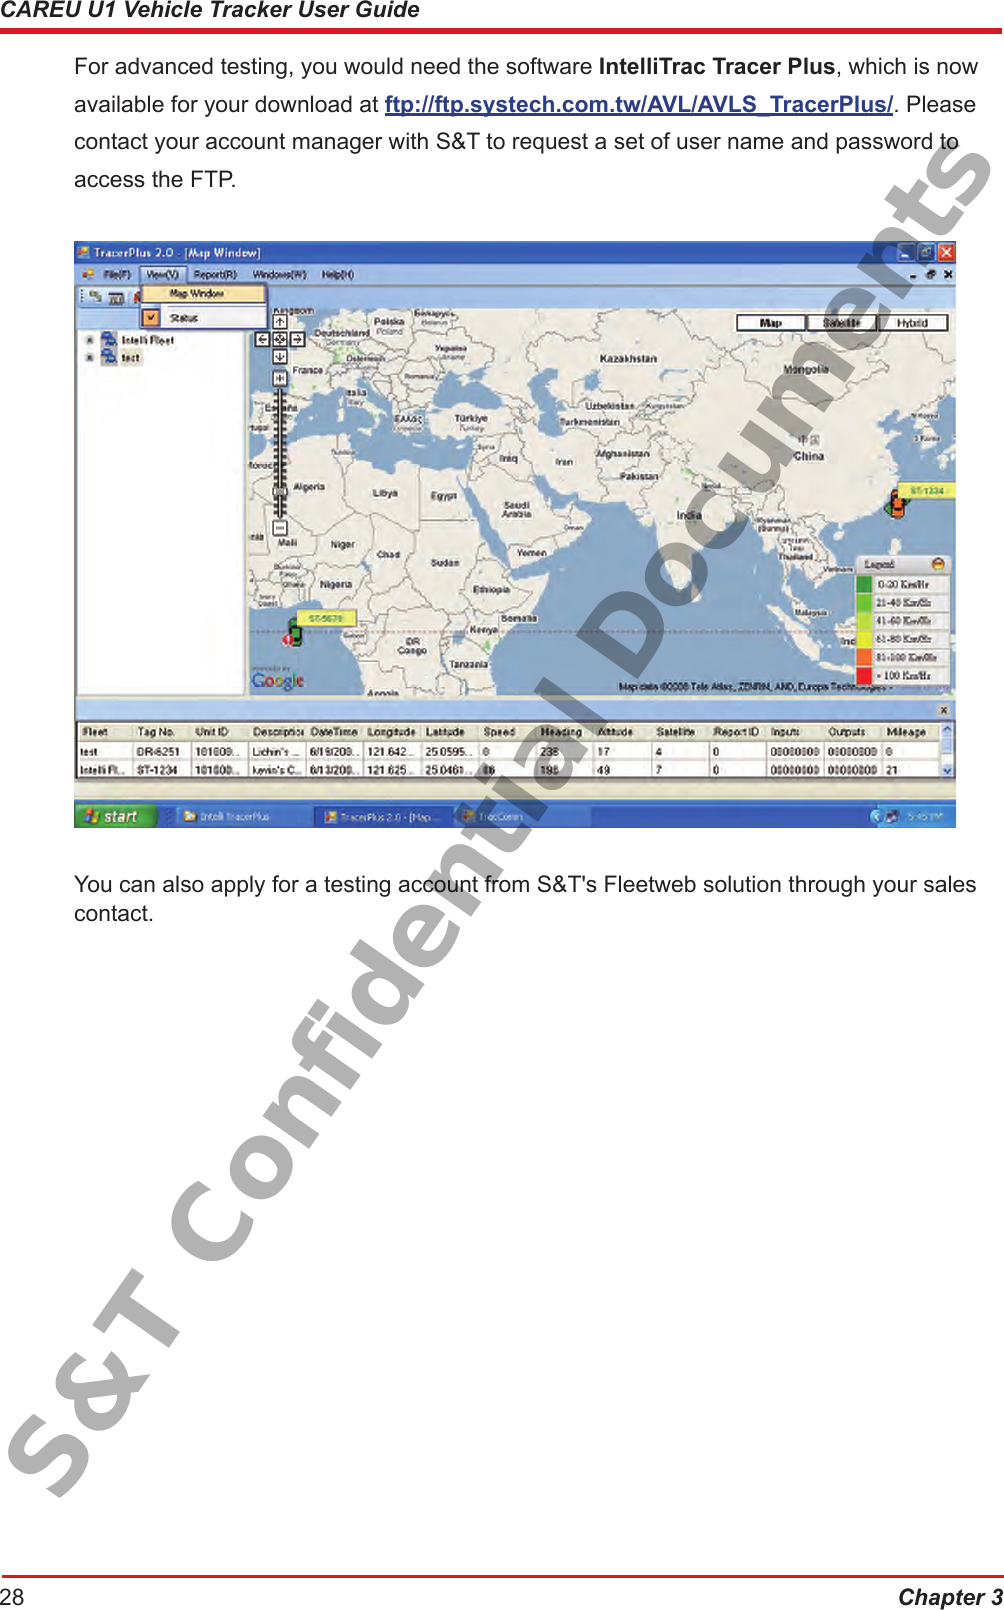 Chapter 328CAREU U1 Vehicle Tracker User Guide  For advanced testing, you would need the software IntelliTrac Tracer Plus, which is now    available for your download at ftp://ftp.systech.com.tw/AVL/AVLS_TracerPlus/. Please    contact your account manager with S&amp;T to request a set of user name and password to     access the FTP.      You can also apply for a testing account from S&amp;T&apos;s Fleetweb solution through your sales    contact.S&amp;T Confidential Documents